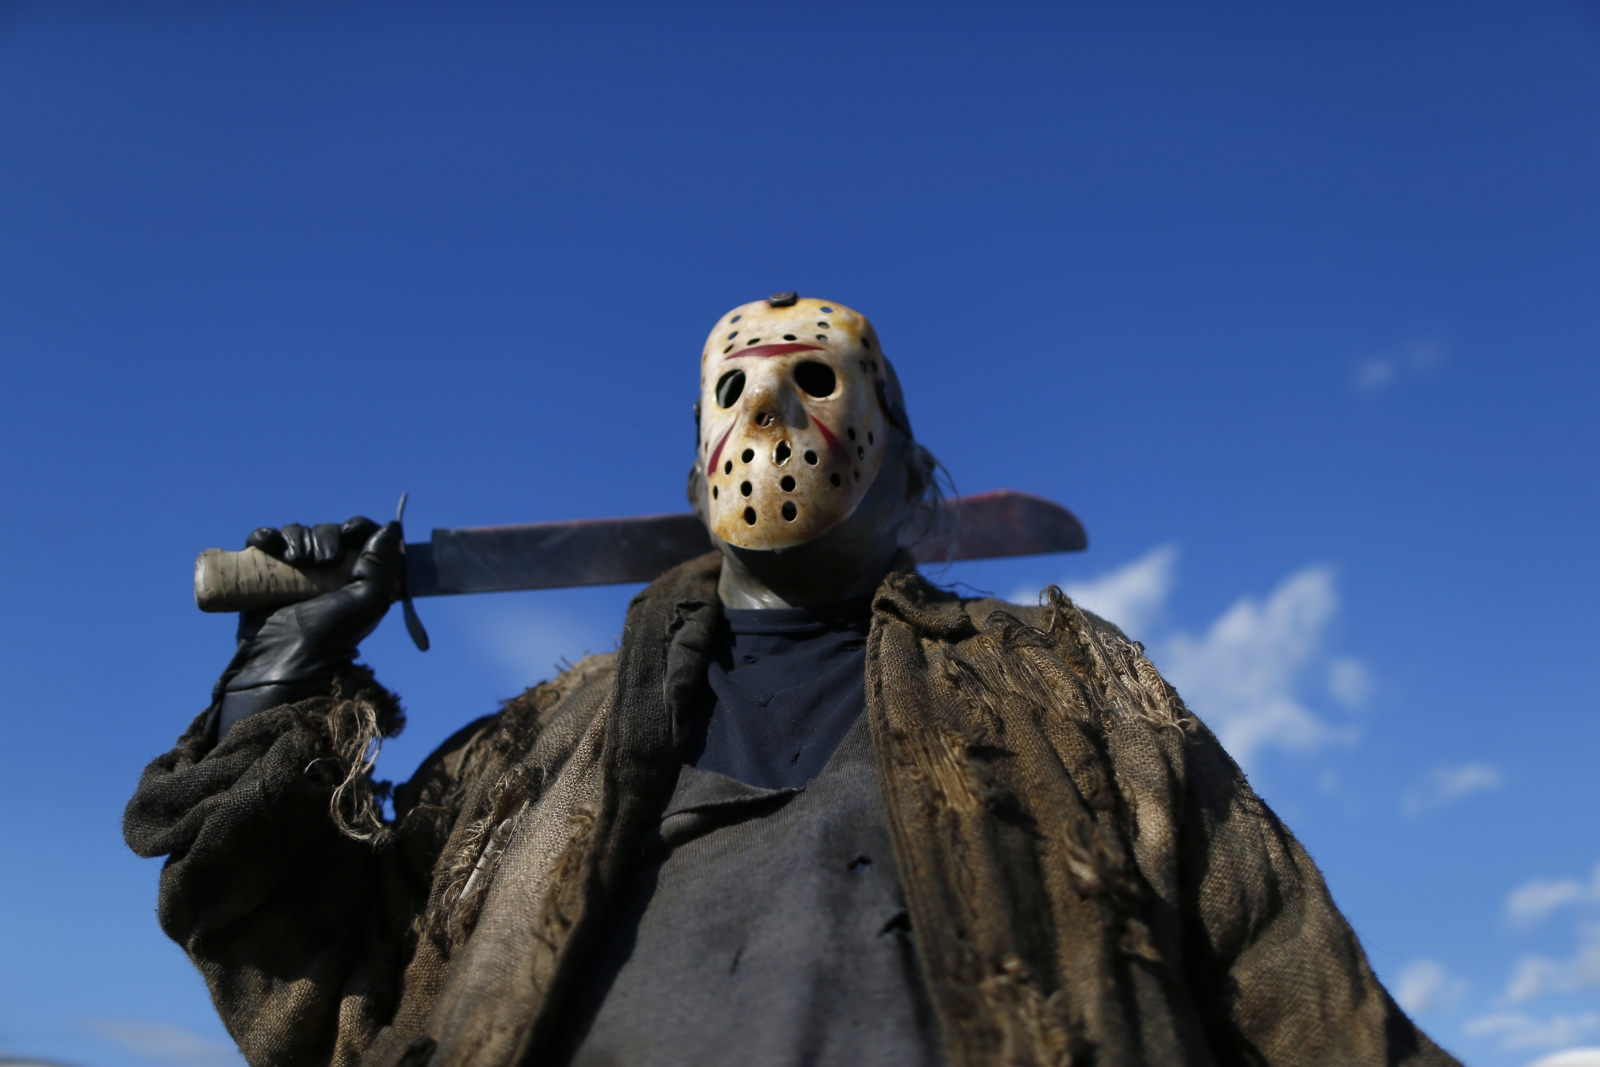 Man attacked with a machete by attacker wearing Friday The 13th 'Jason' hockey mask.